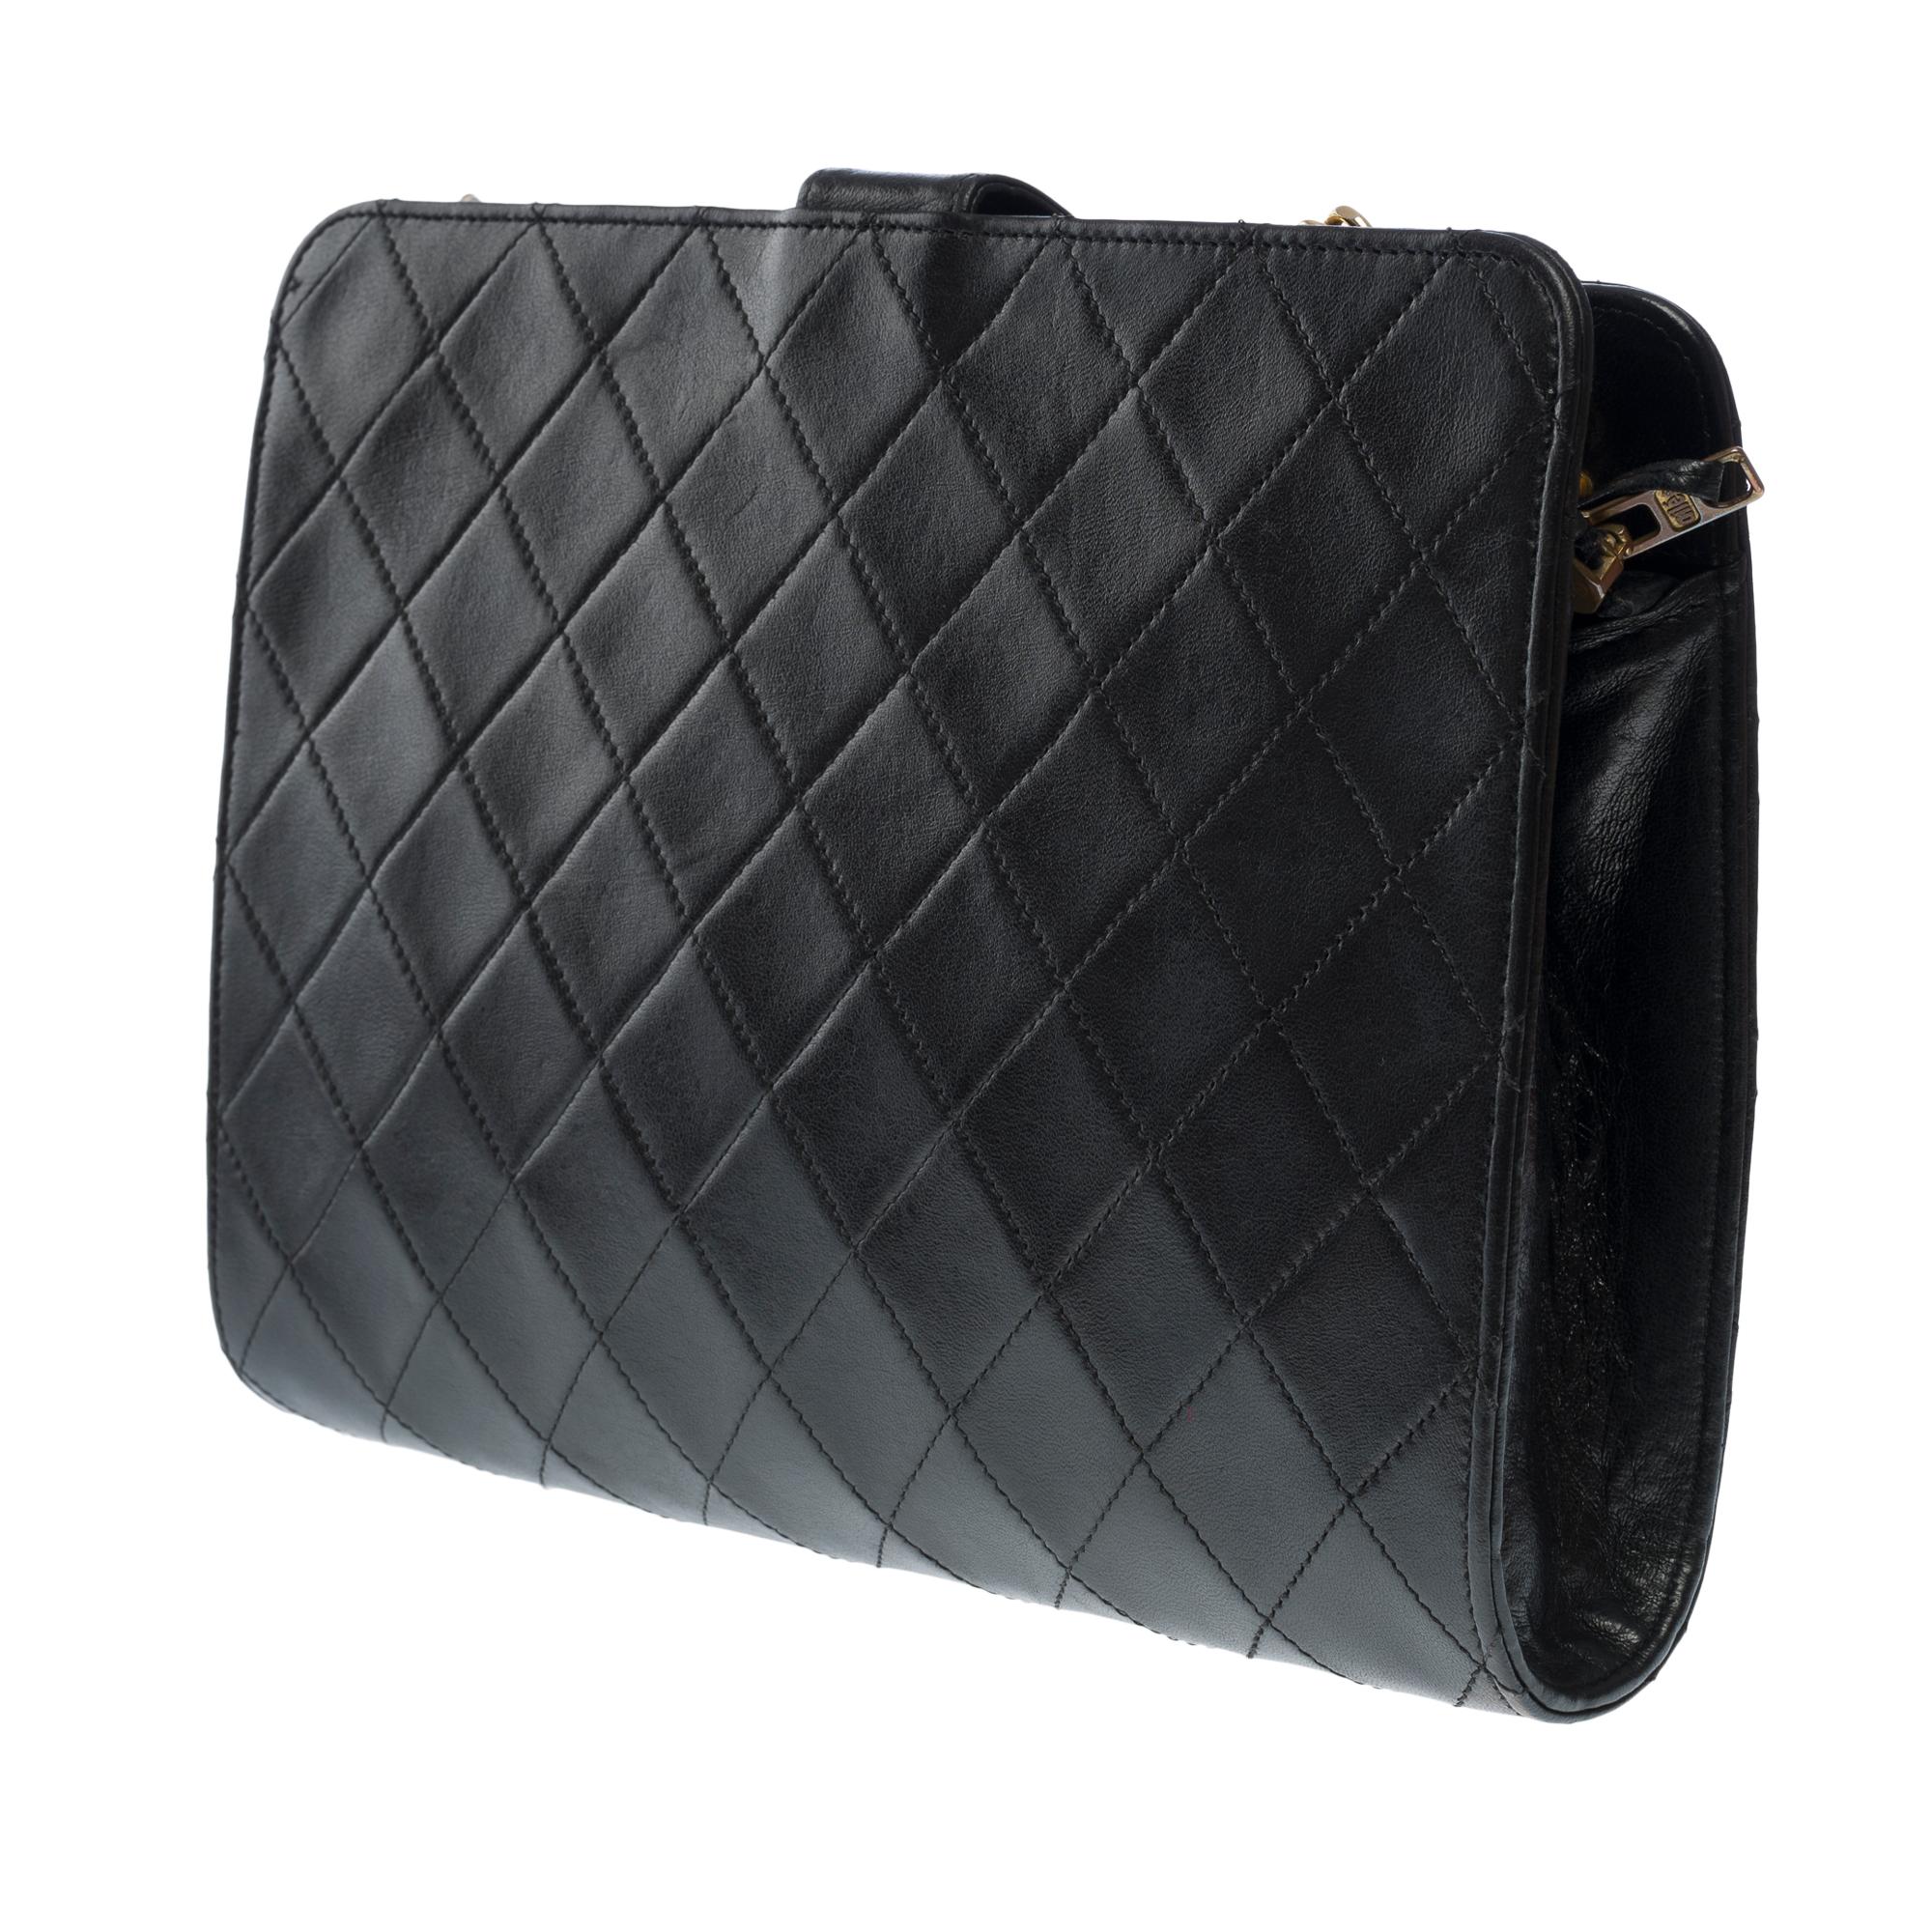 Gorgeous Chanel Classic vintage shoulder bag in black lambskin leather, GHW 1